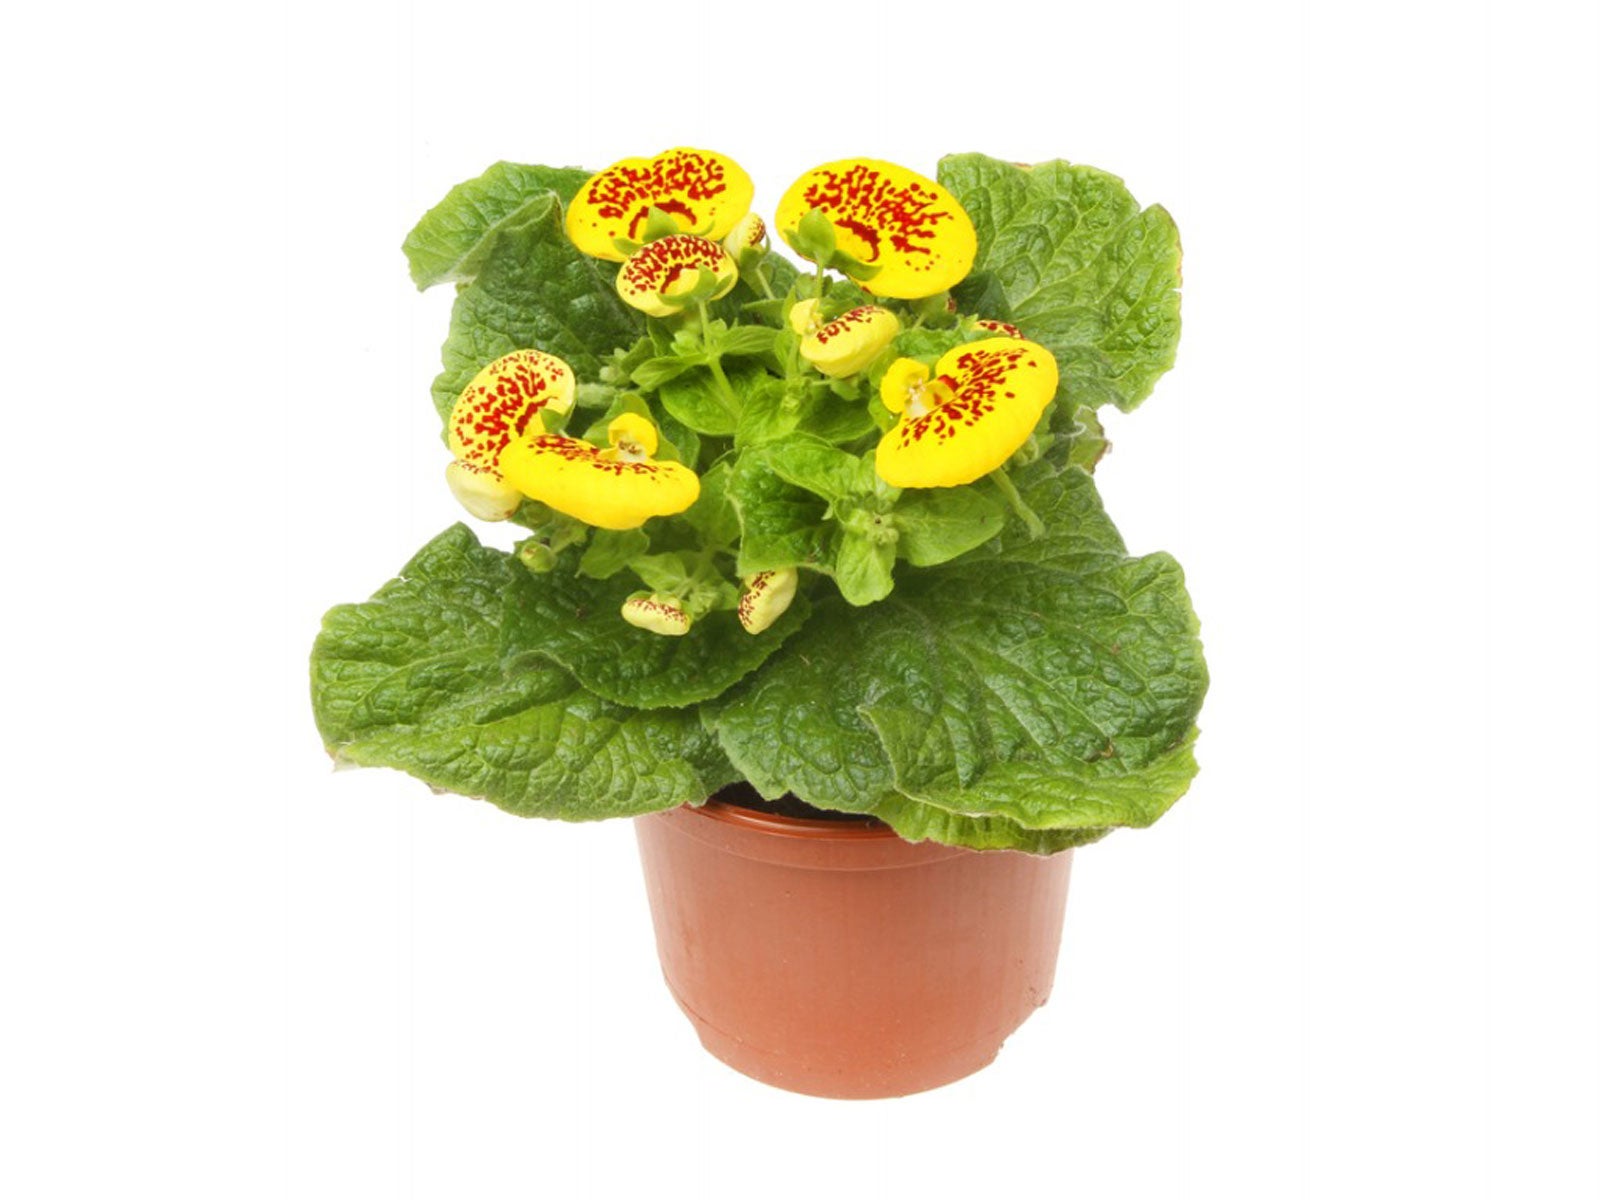 Calceolaria Stock Photos and Images - 123RF